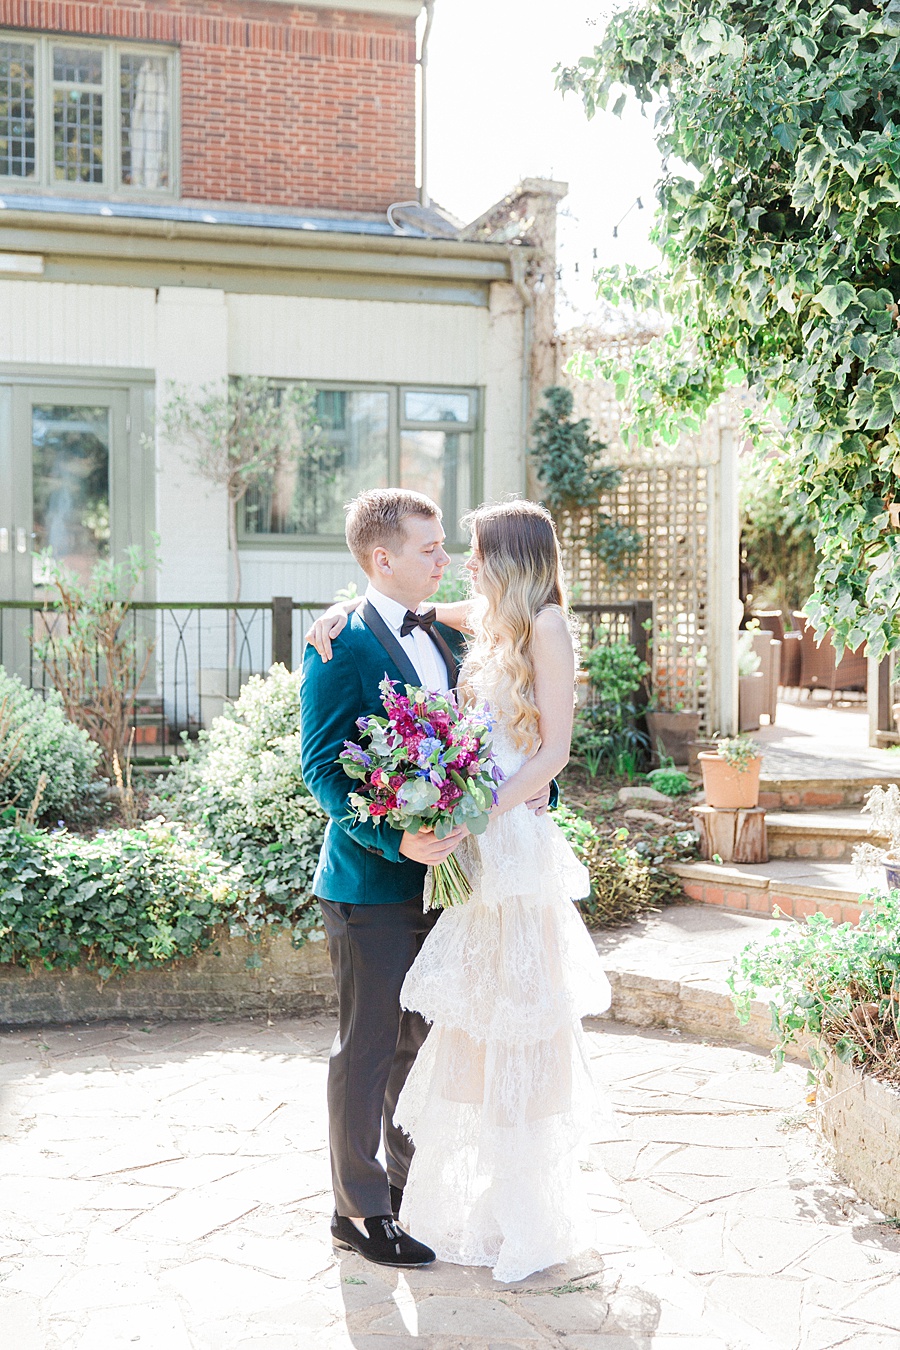 inspiration for a Greek wedding, photo credit Maxeen Kim Photography (26)